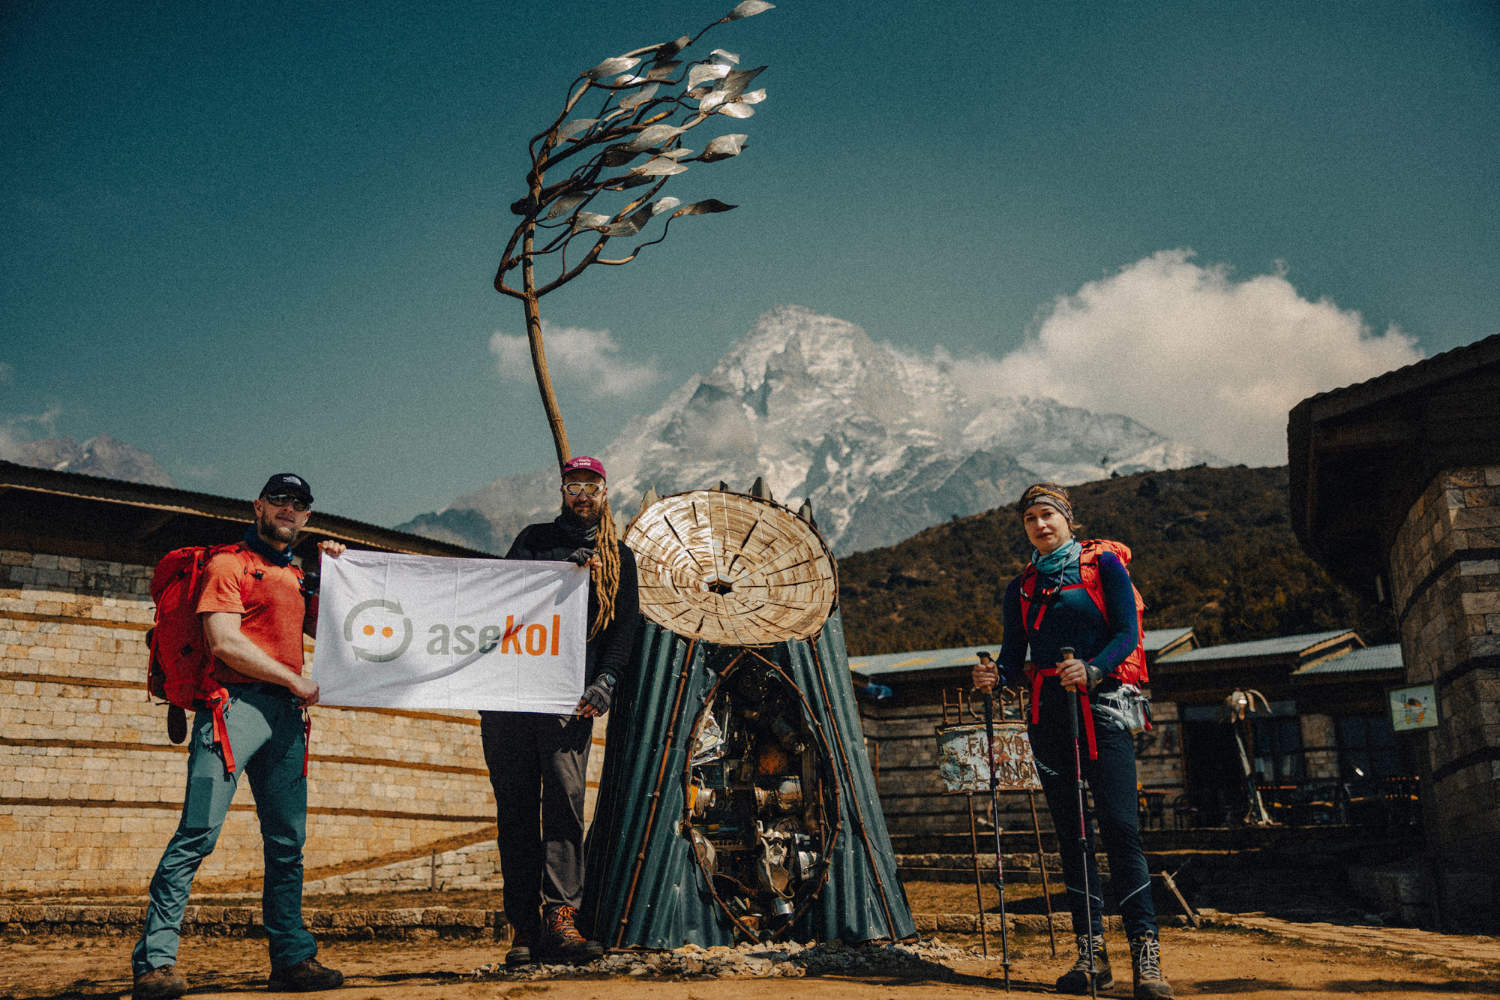 Asekol-EVEREST-Expedition-4